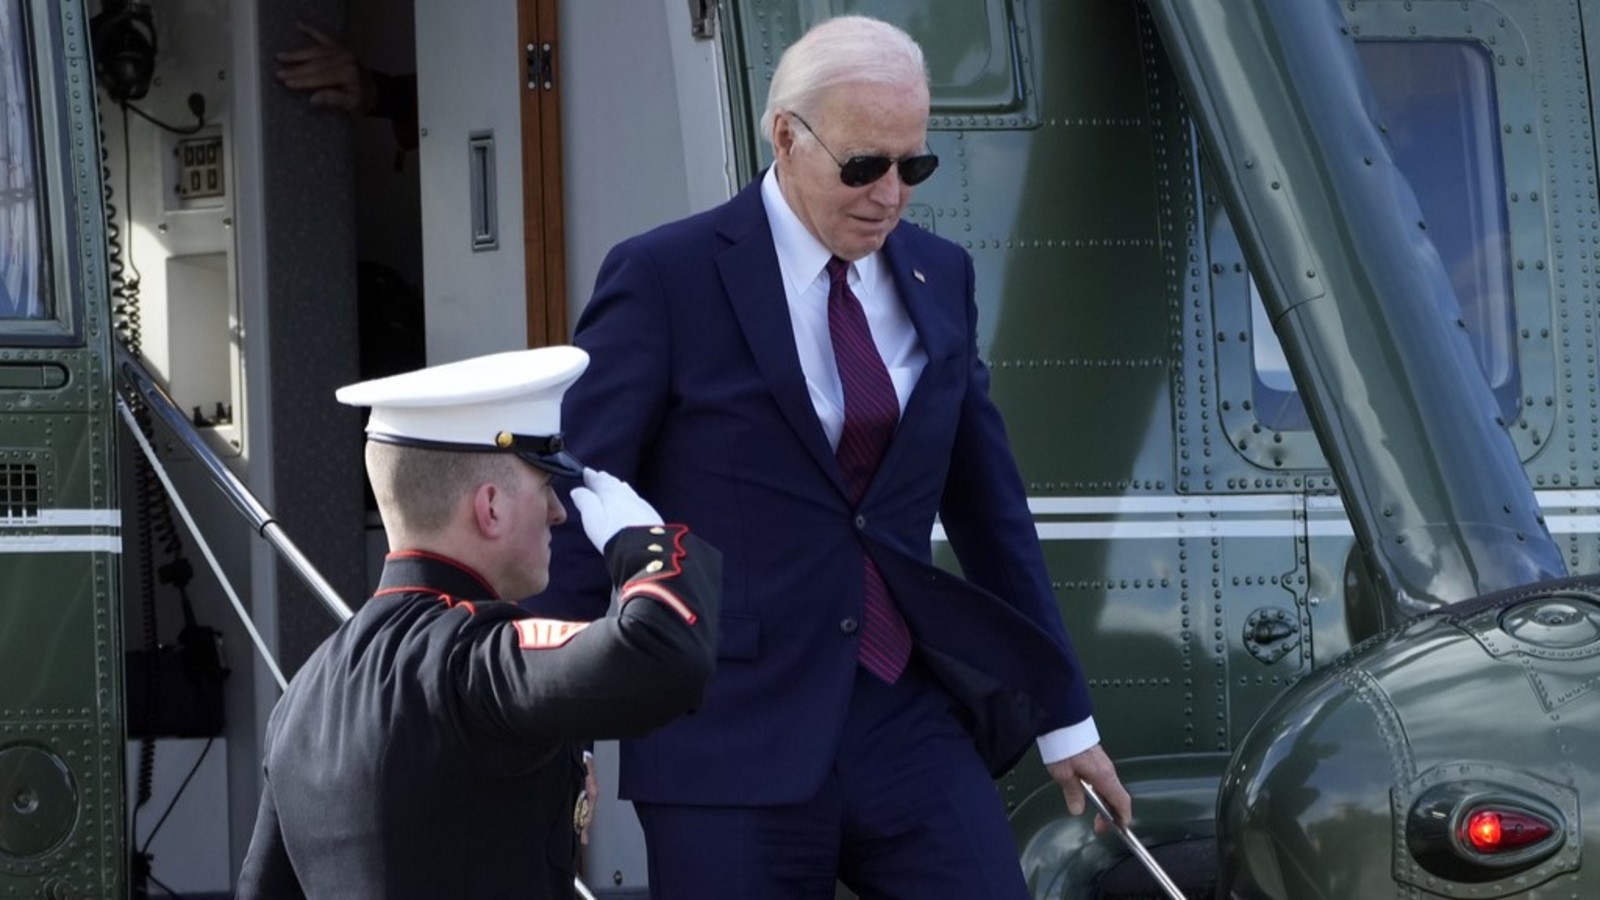 President Biden traveling to Bay Area Thursday and Friday for campaign events